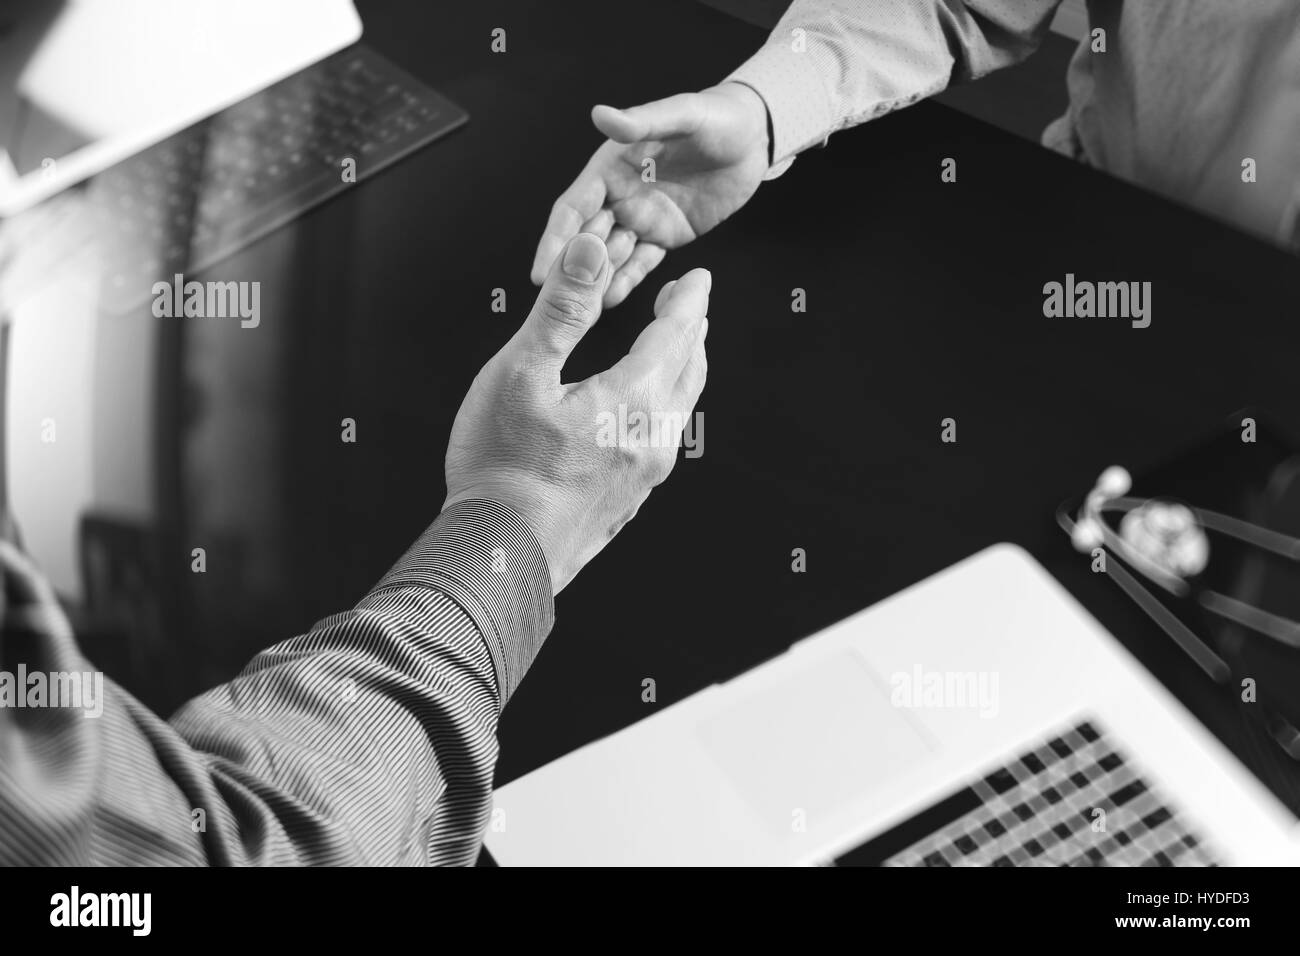 Medical and healthcare concept,Doctor and patient shaking hands in modern office at hospital,black and white Stock Photo